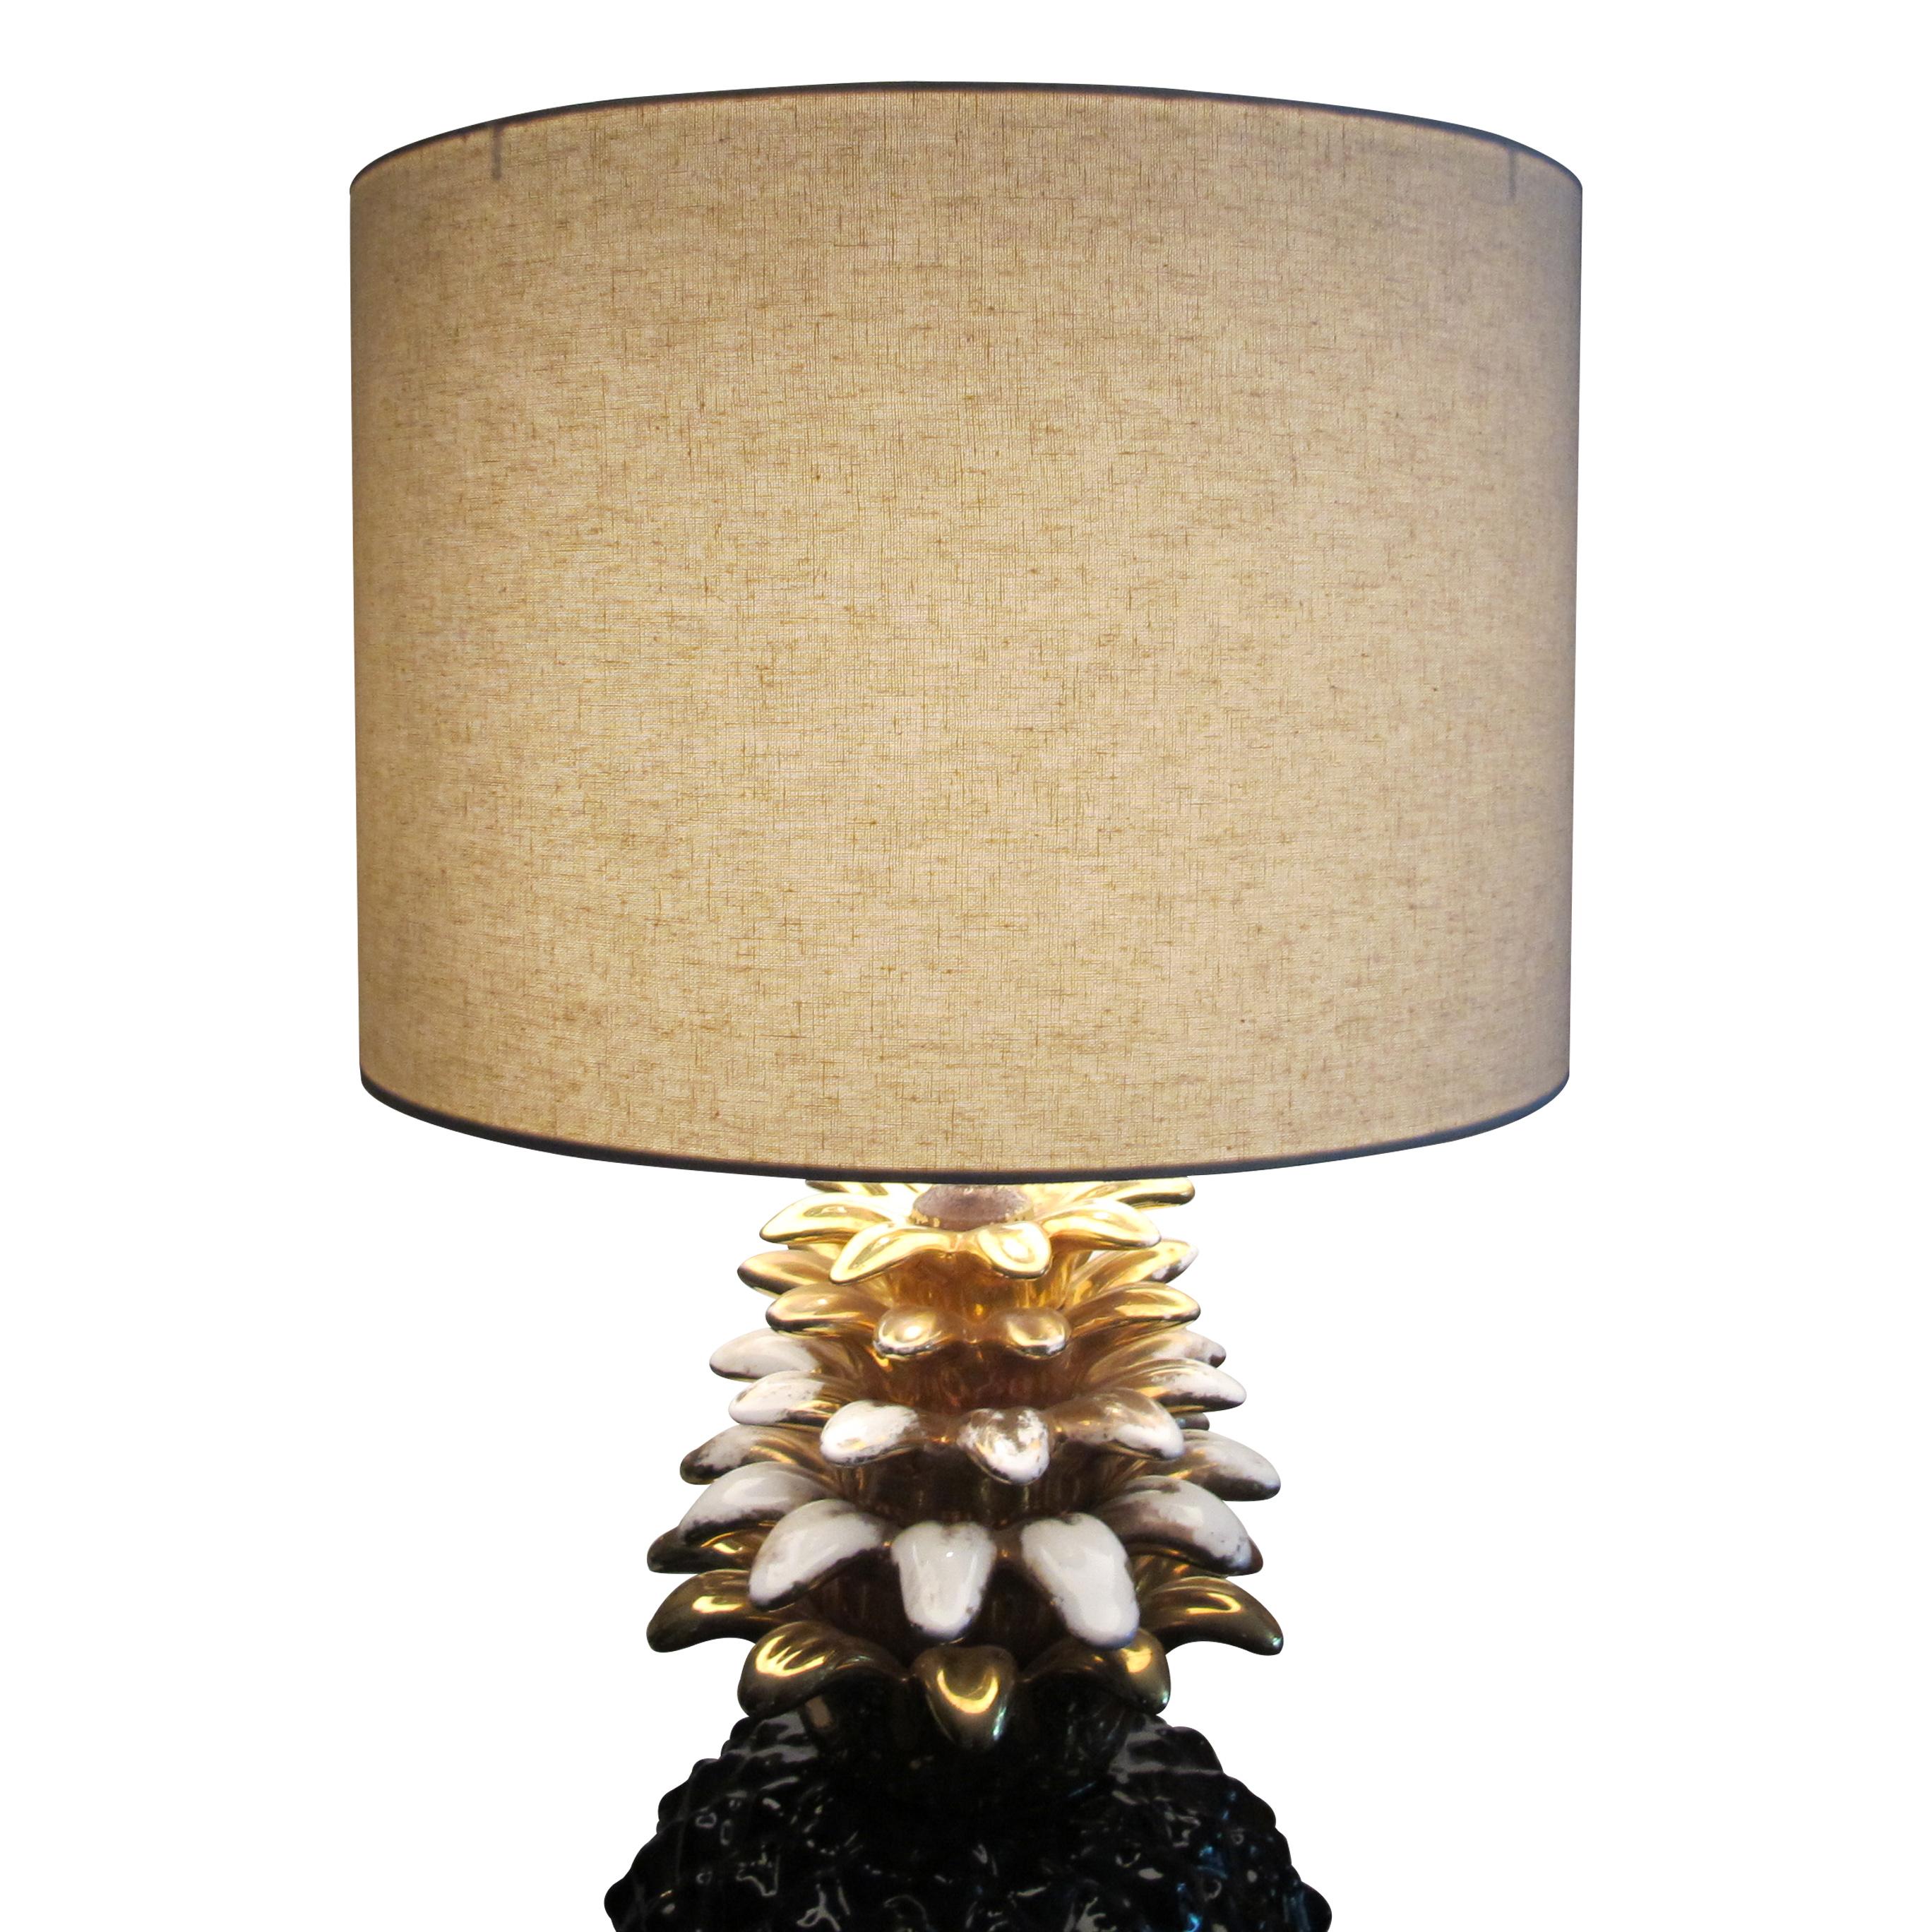 Hollywood Regency 1970s Large Ceramic Black and Gold Pineapple French Lamp, Maison Lancel For Sale